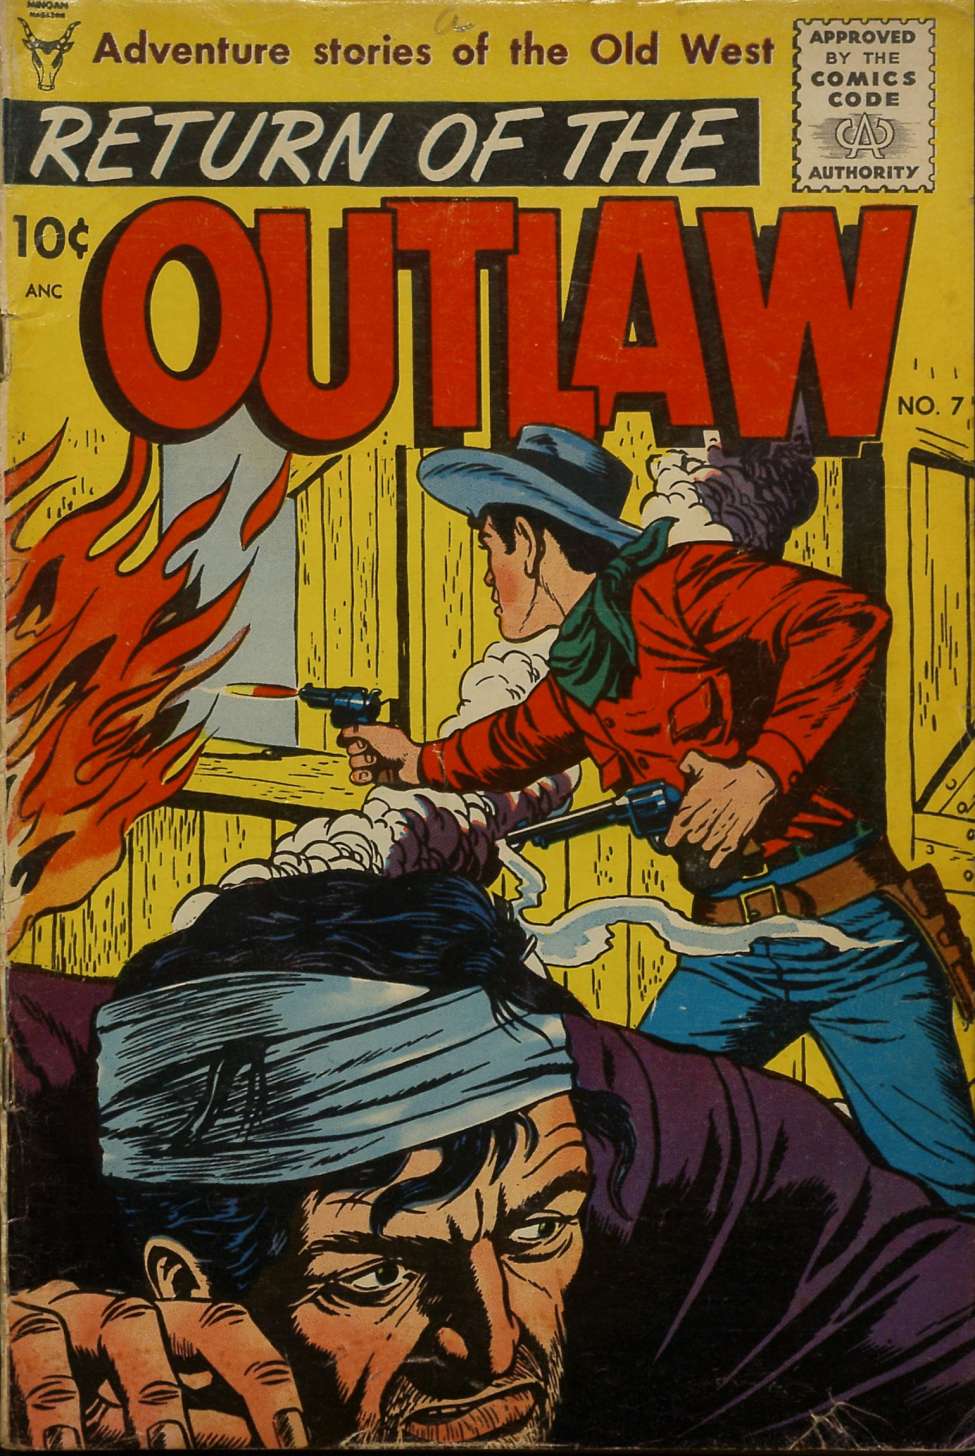 Book Cover For Return of the Outlaw 7